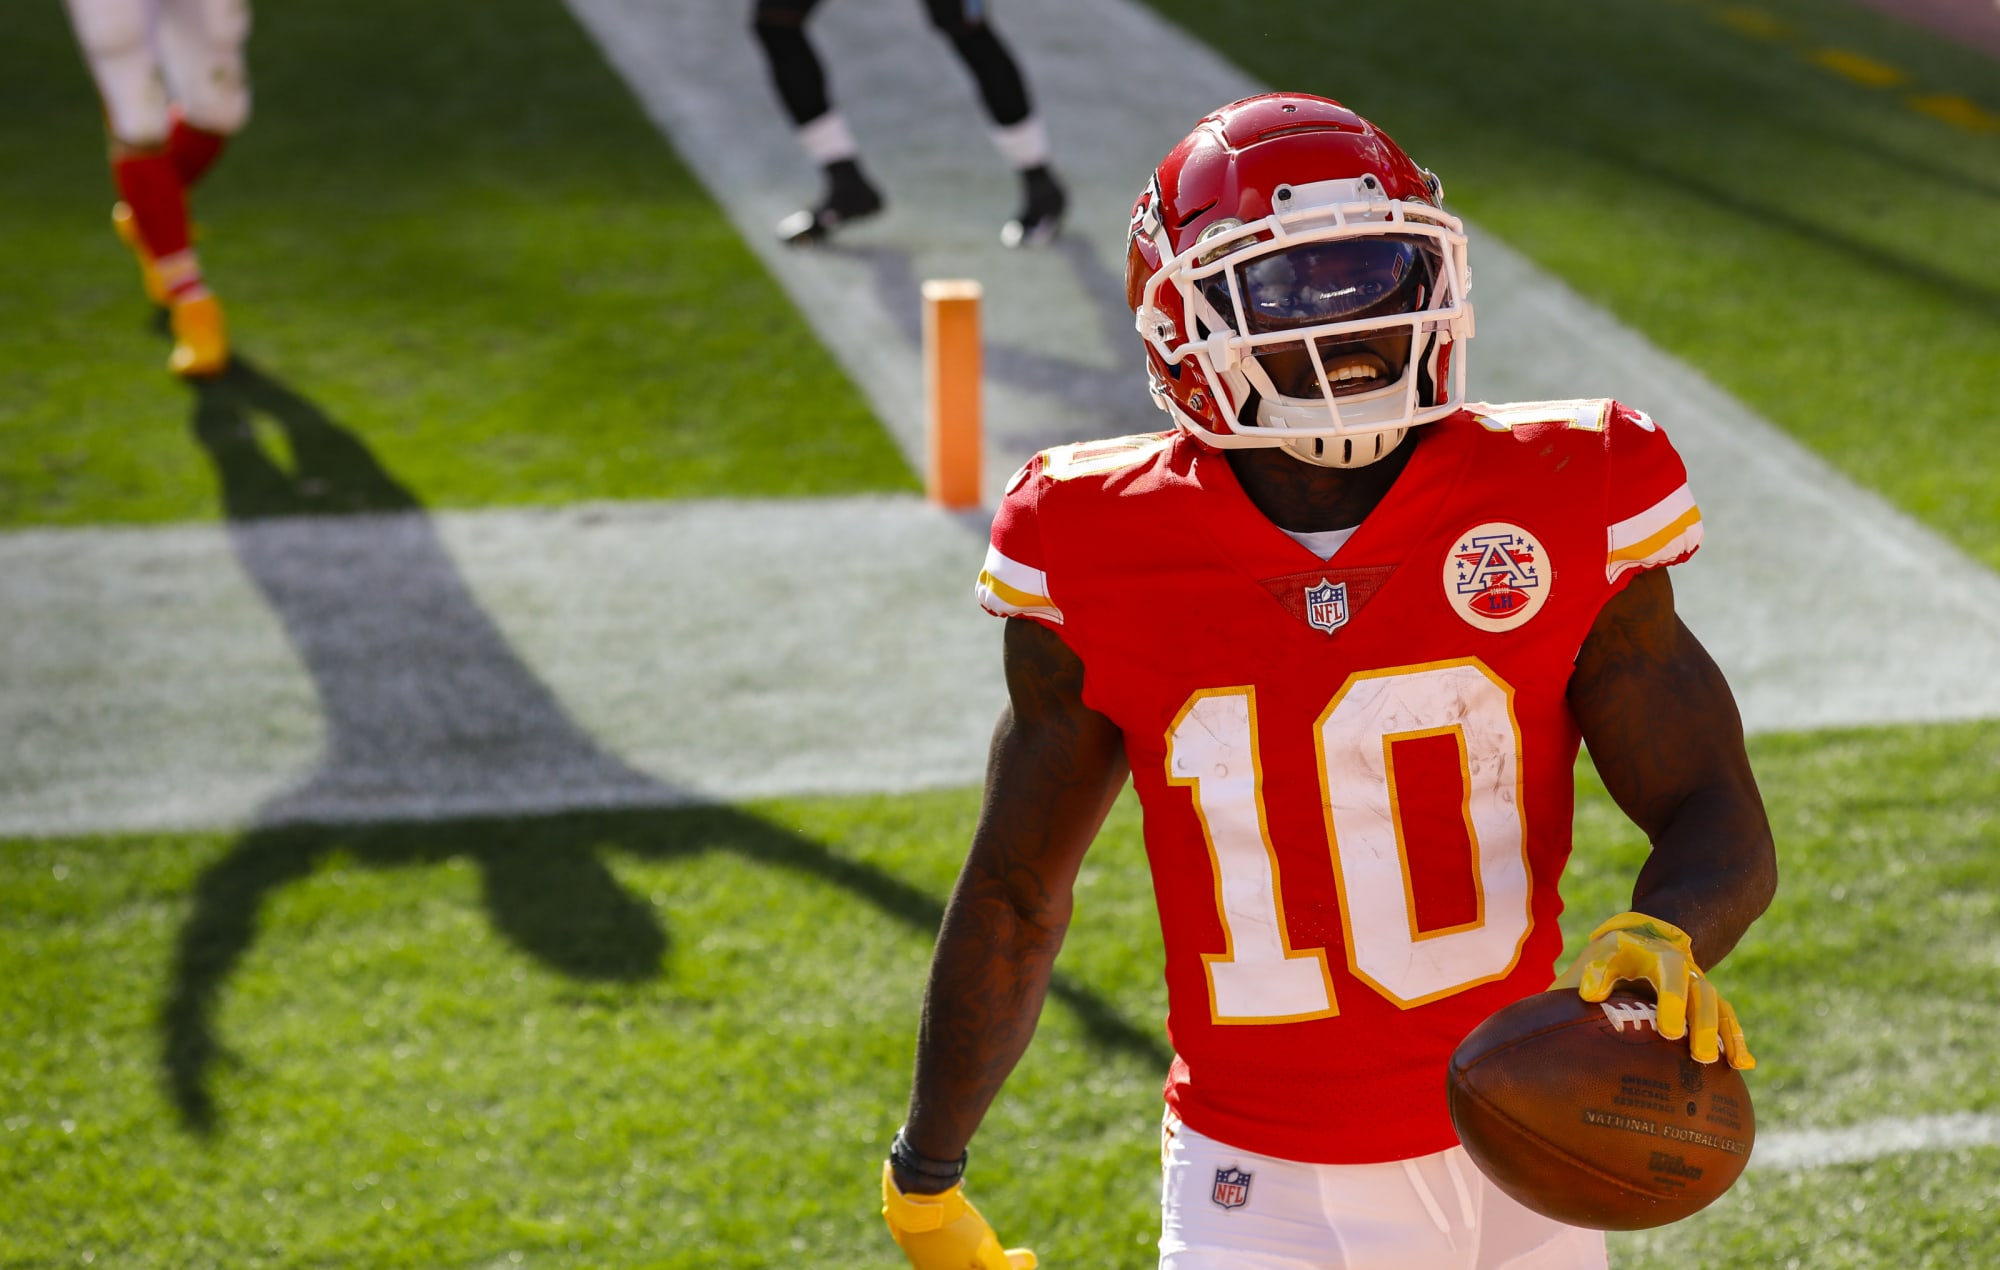 Tyreek Hill lands at No. 15 on NFL's Top 100 Players for 2021